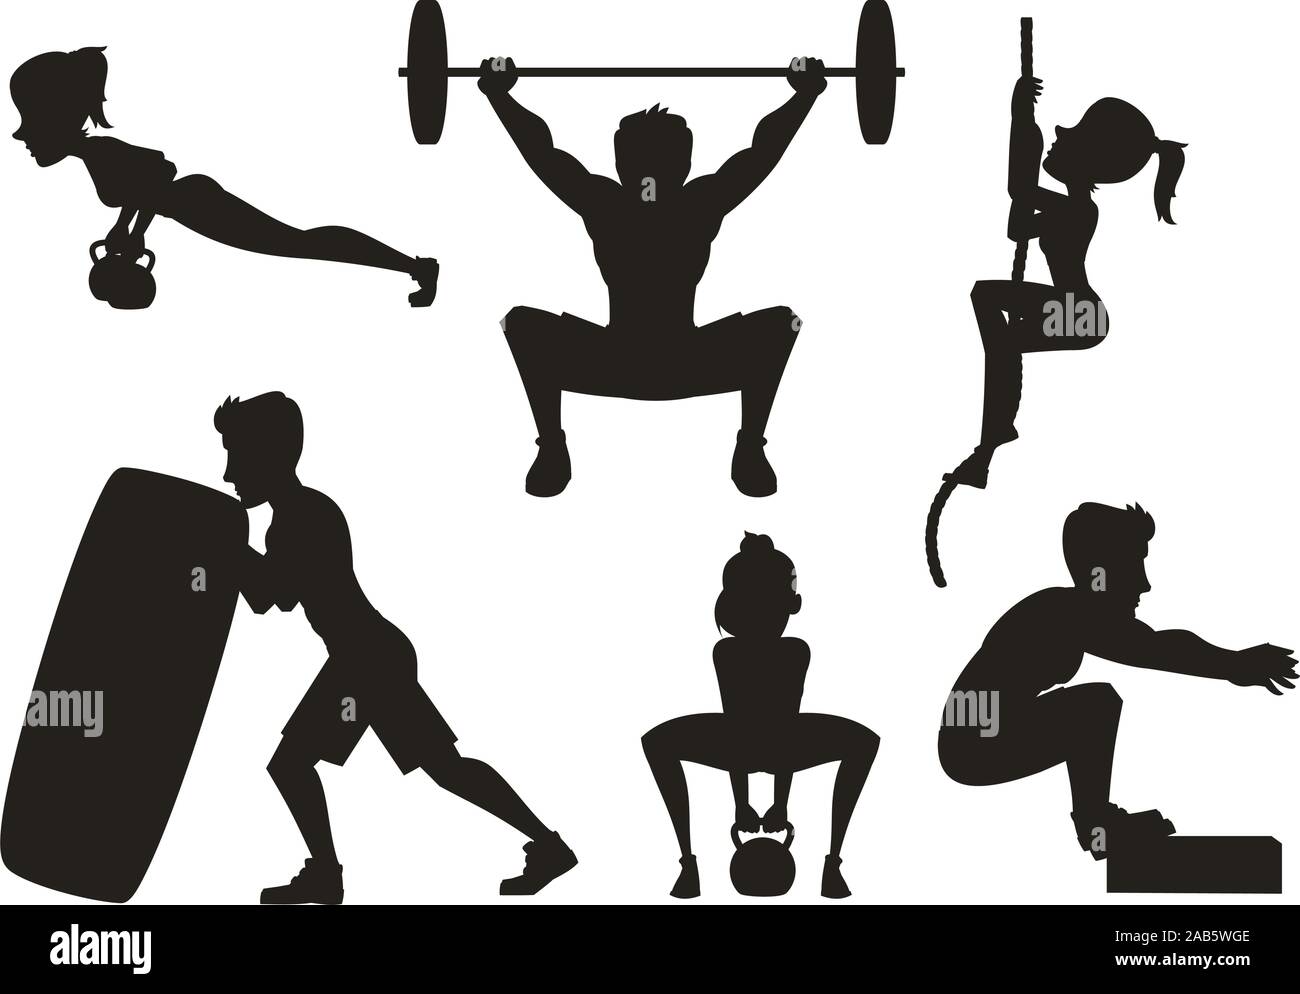 Crossfit training silhouettes vector Stock Vector